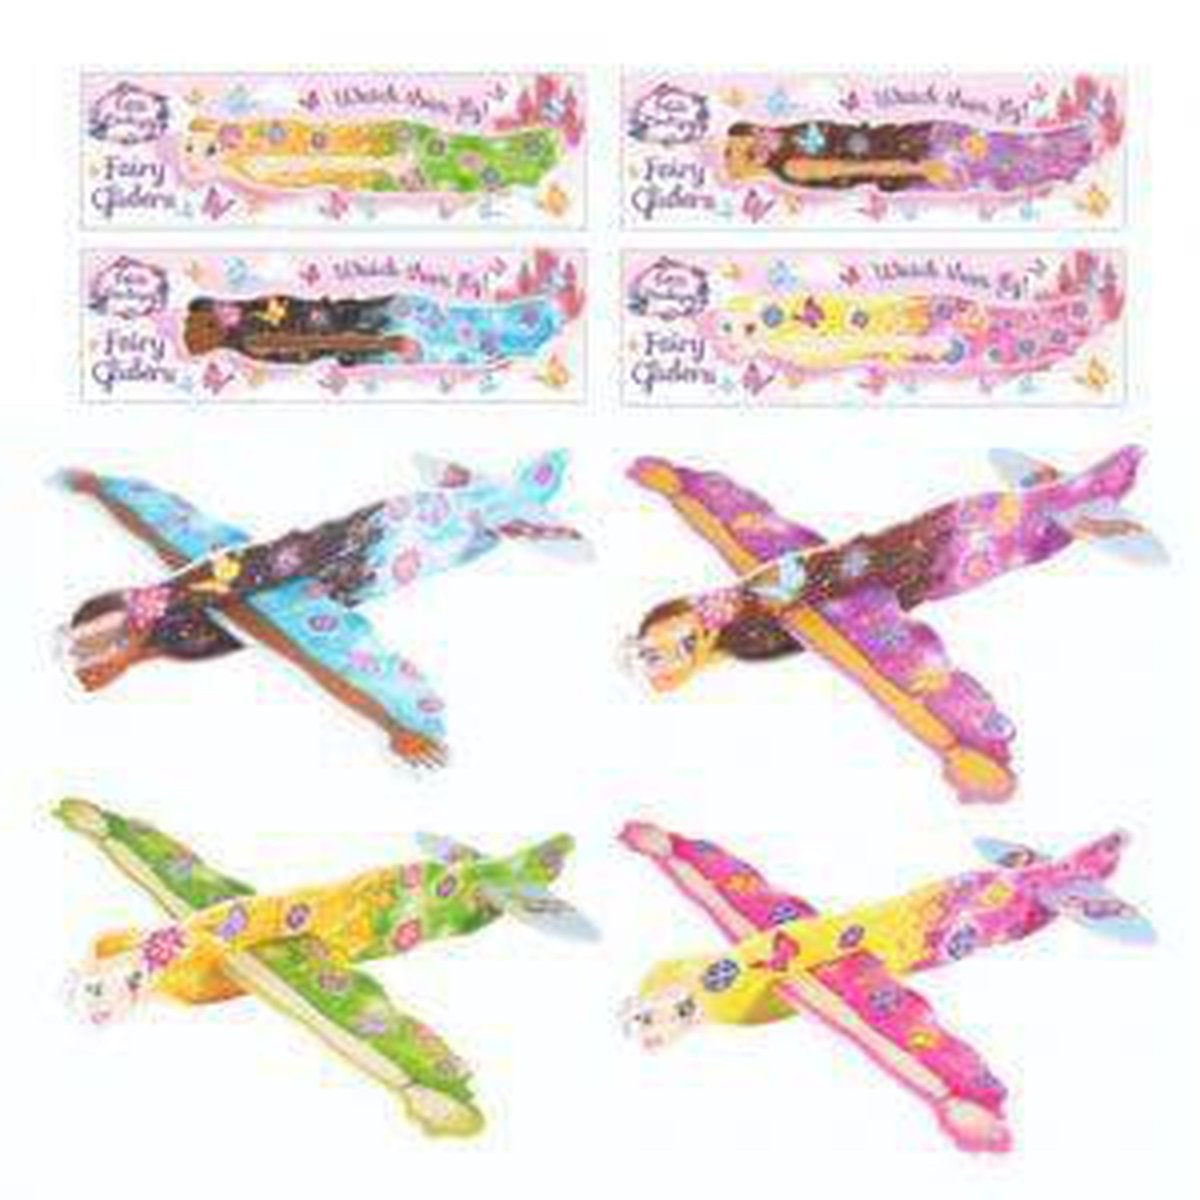 Fairy Gliders - Kids Party Craft